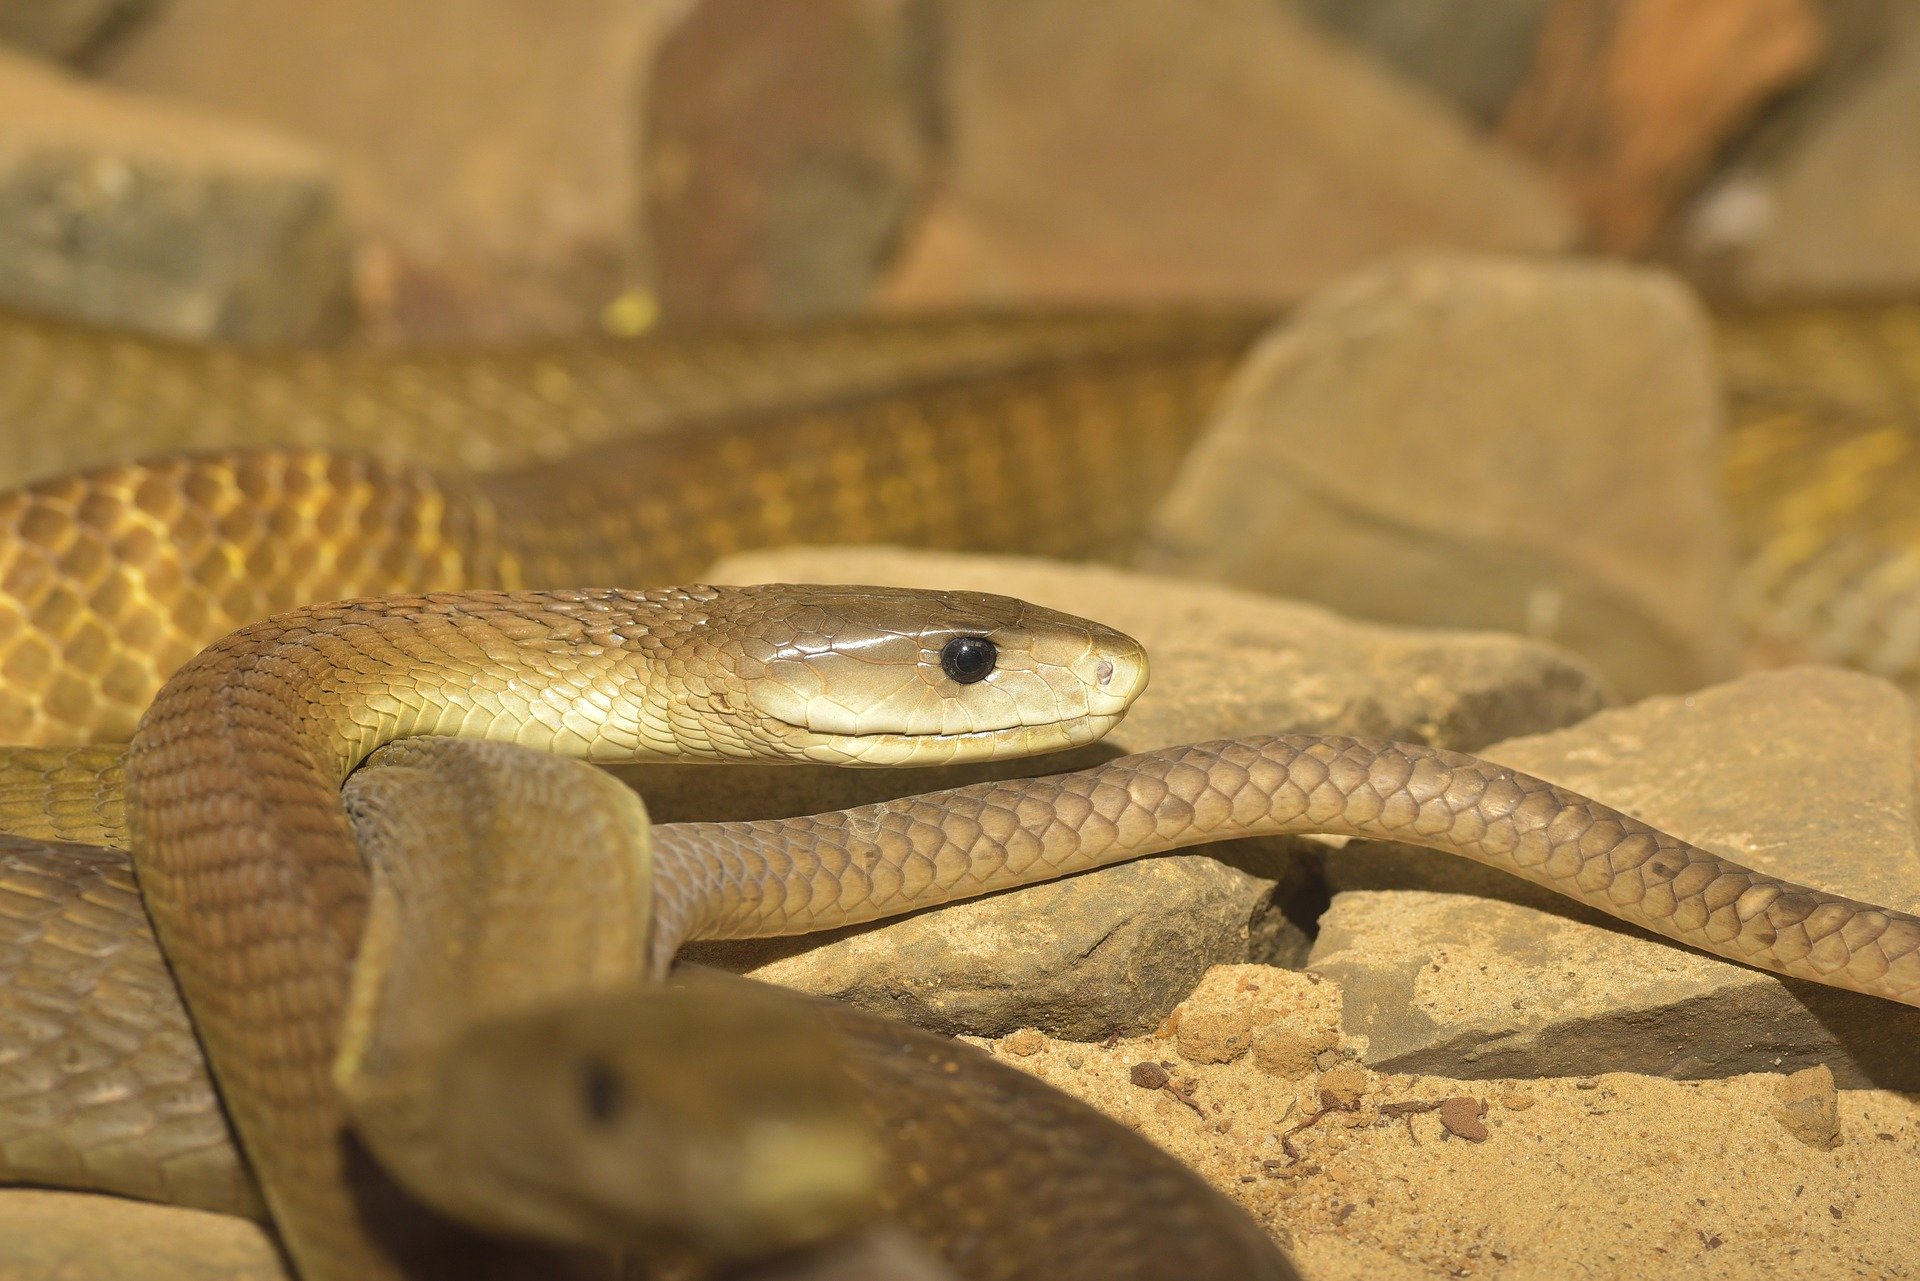 Venomous snakes could start migrating in large numbers if we hit 5ºC warming, predict scientists